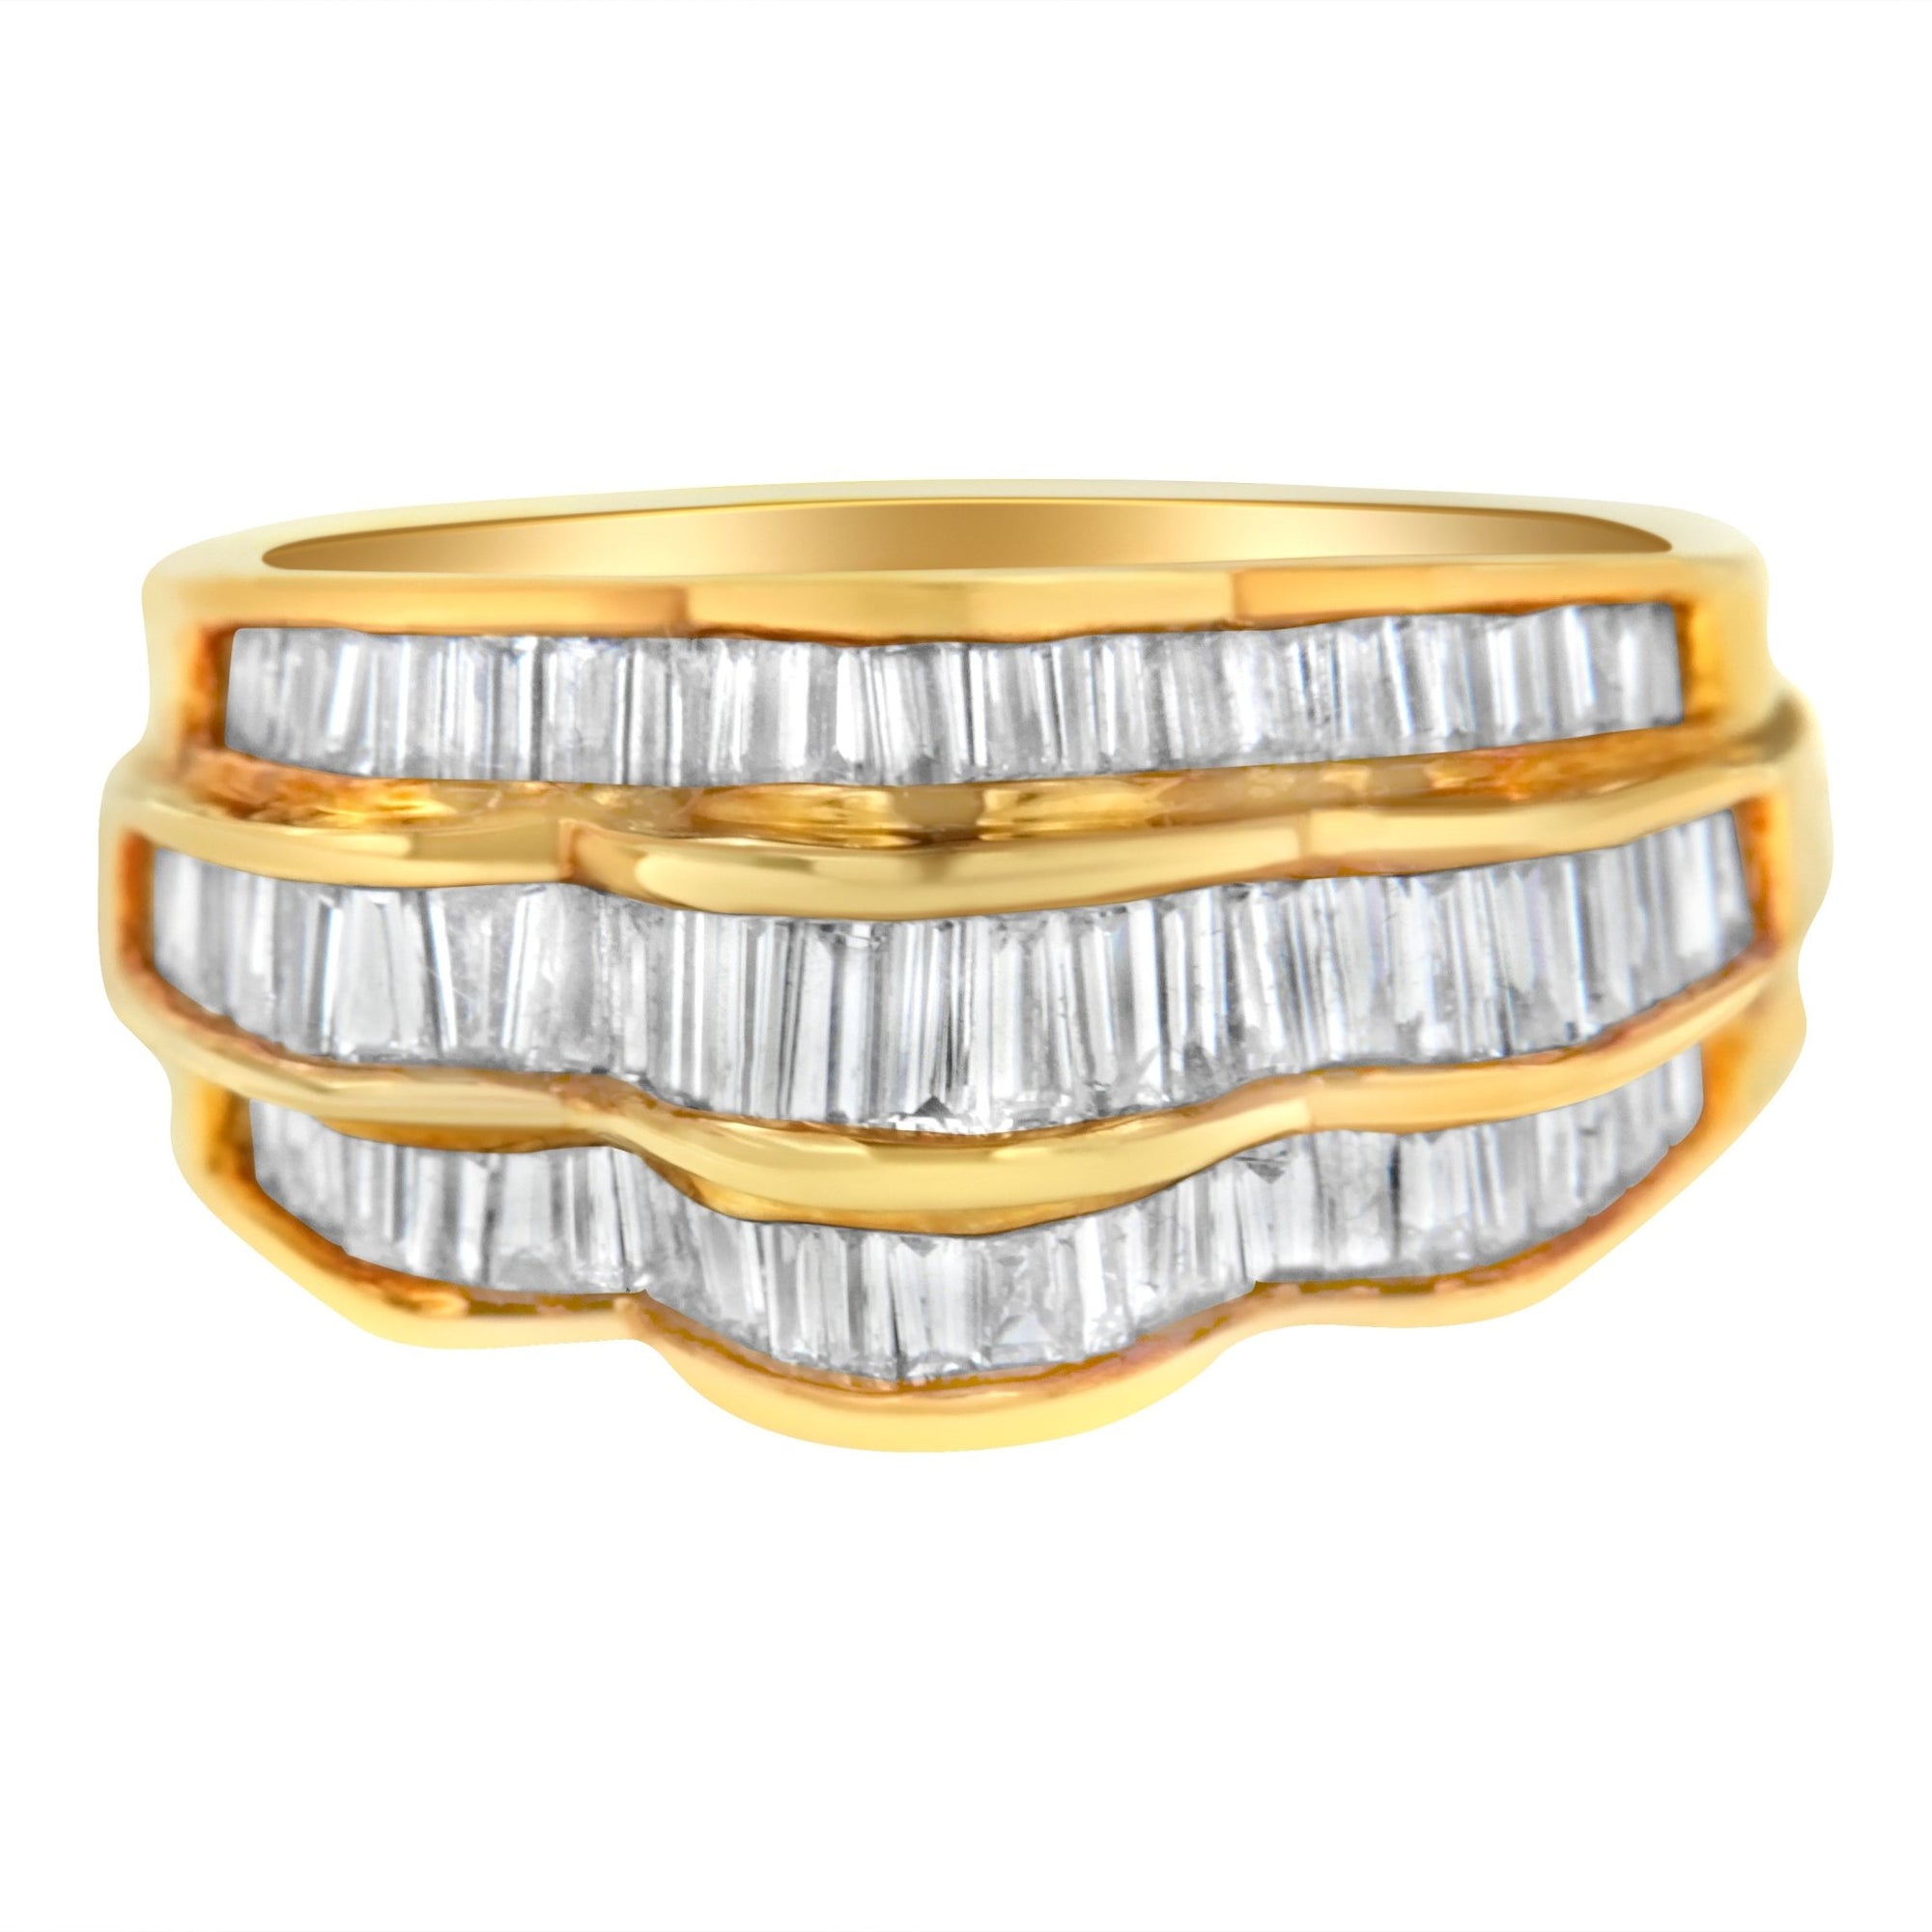 14KT Yellow Gold Diamond Multi-Row Band Ring (1 1/4 cttw, H-I Color, SI1-SI2 Clarity) - LinkagejewelrydesignLinkagejewelrydesign